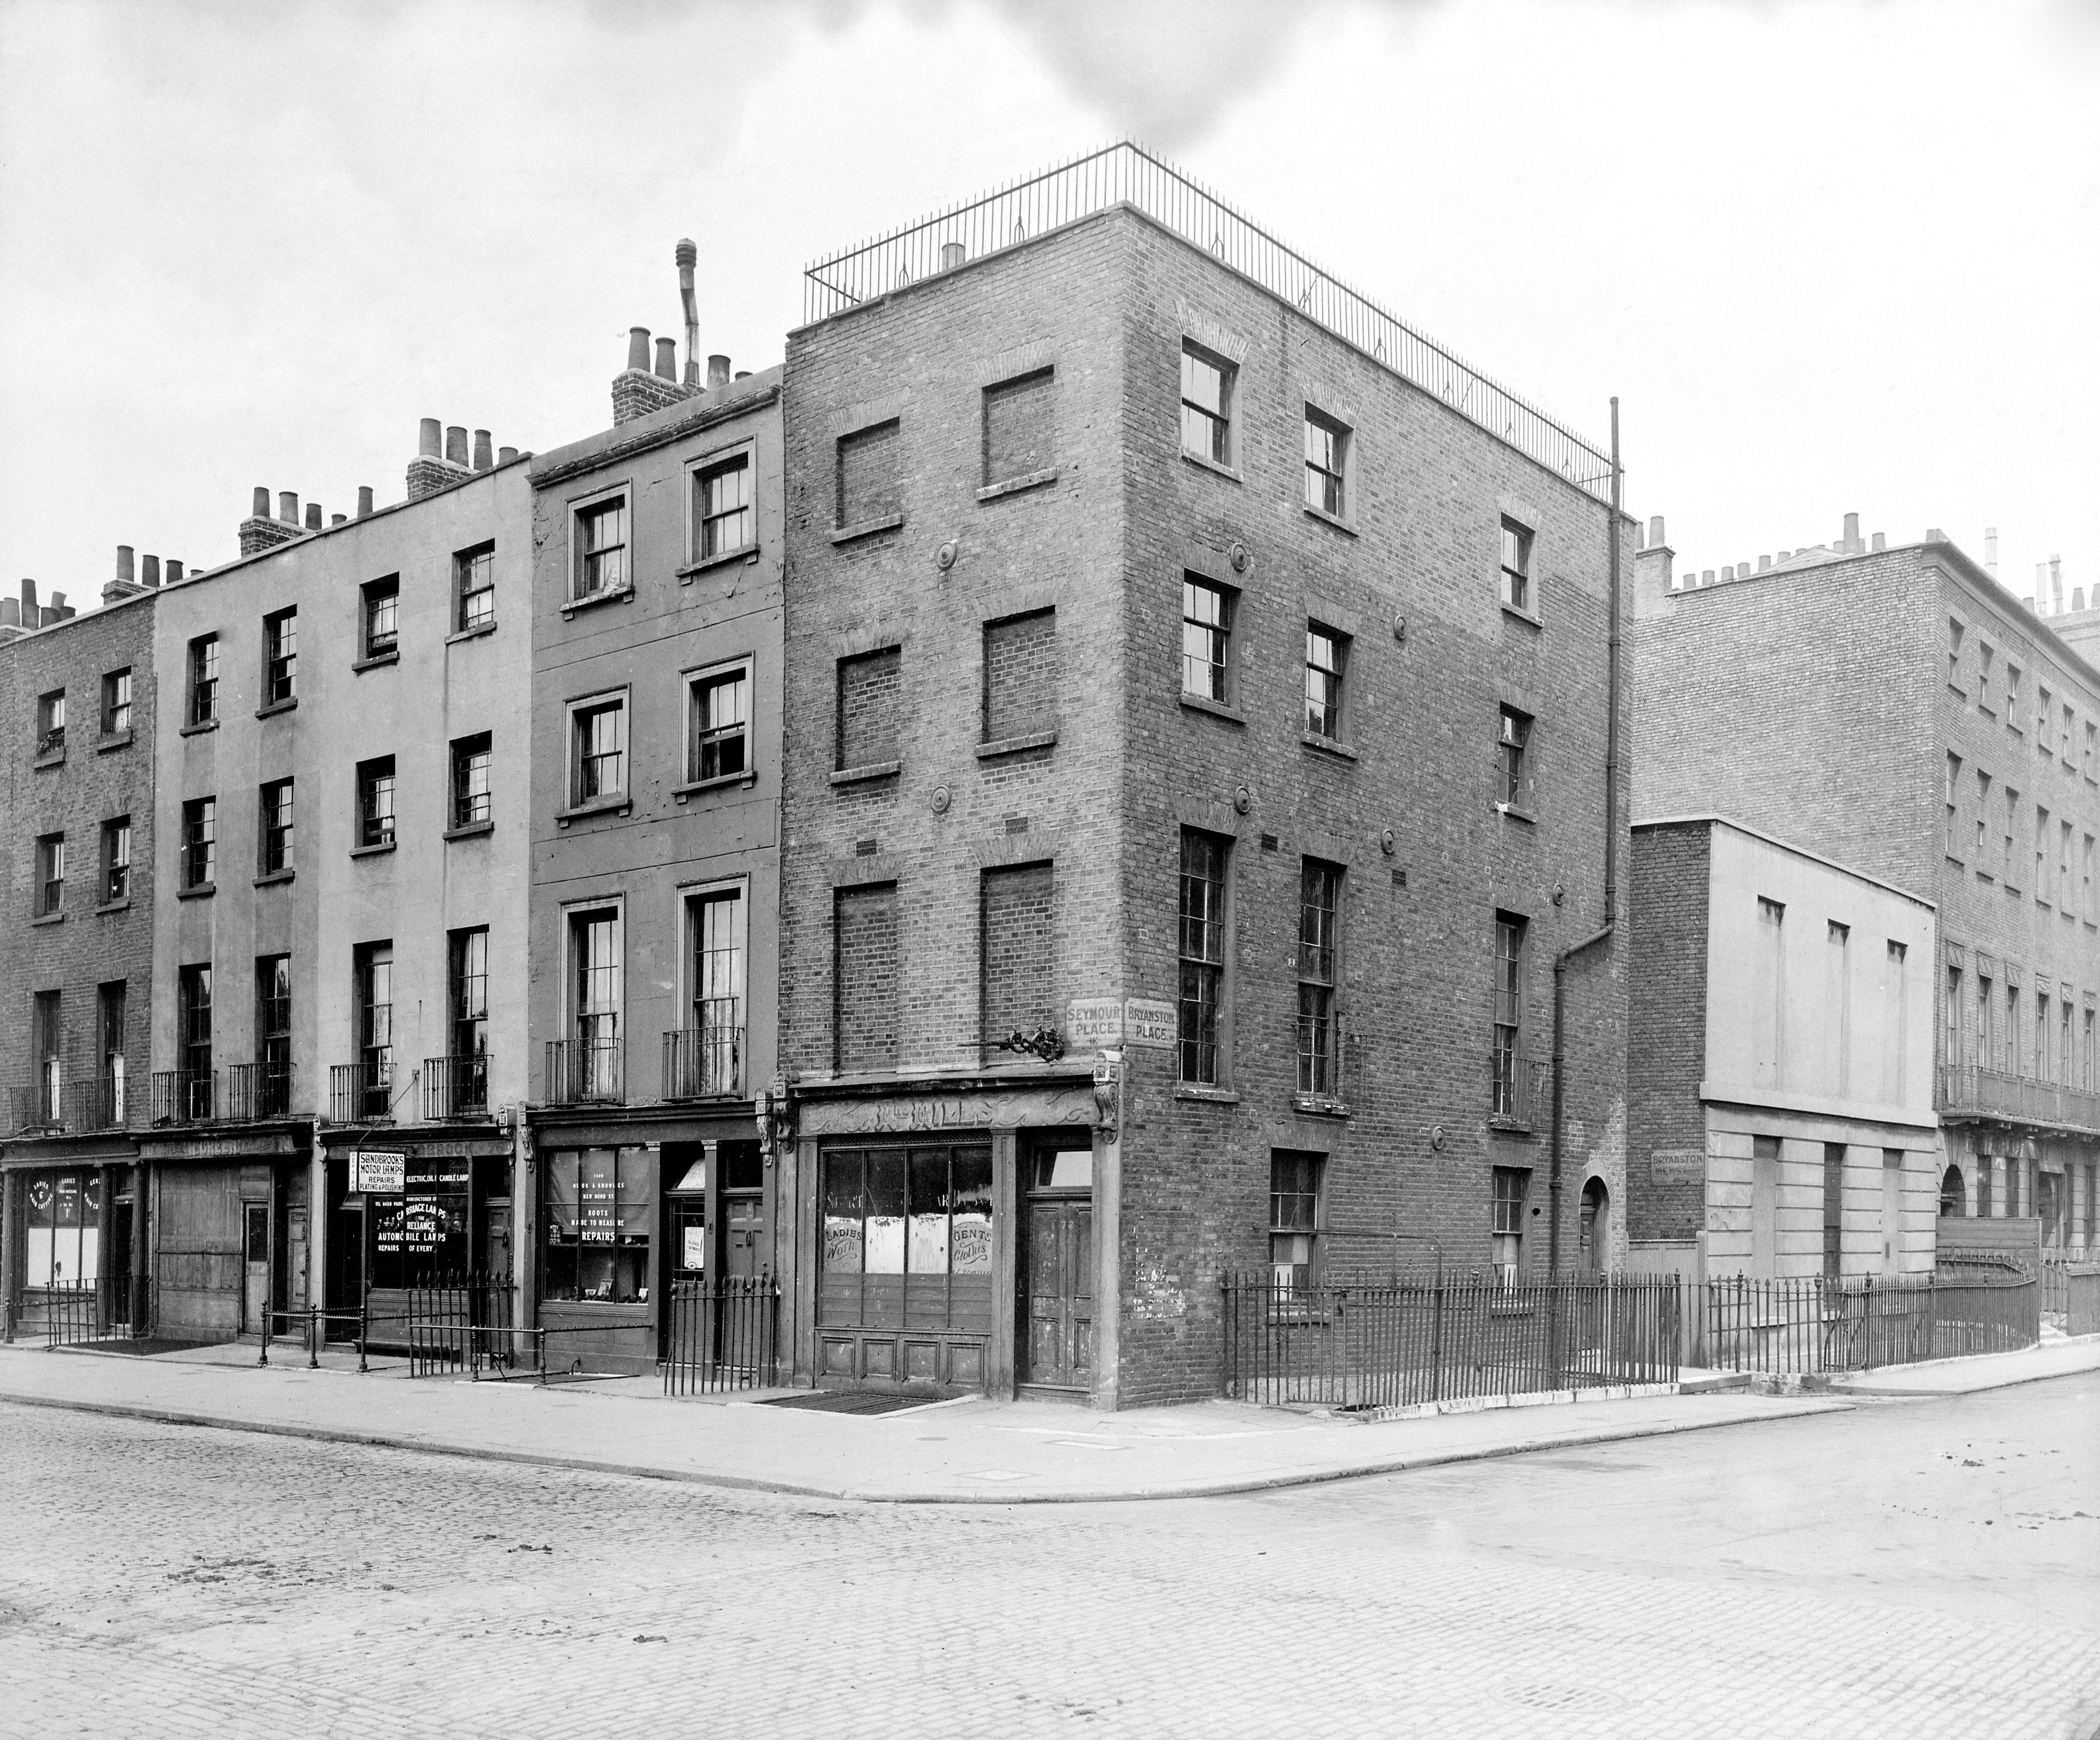 St. Mary's Dispensary for Women and Children, 69 Seymour Place, London. It grew into the present day Elizabeth Garrett Anderson Hospital in Euston Road. Image from Wellcome Collection under a CC BY licence.